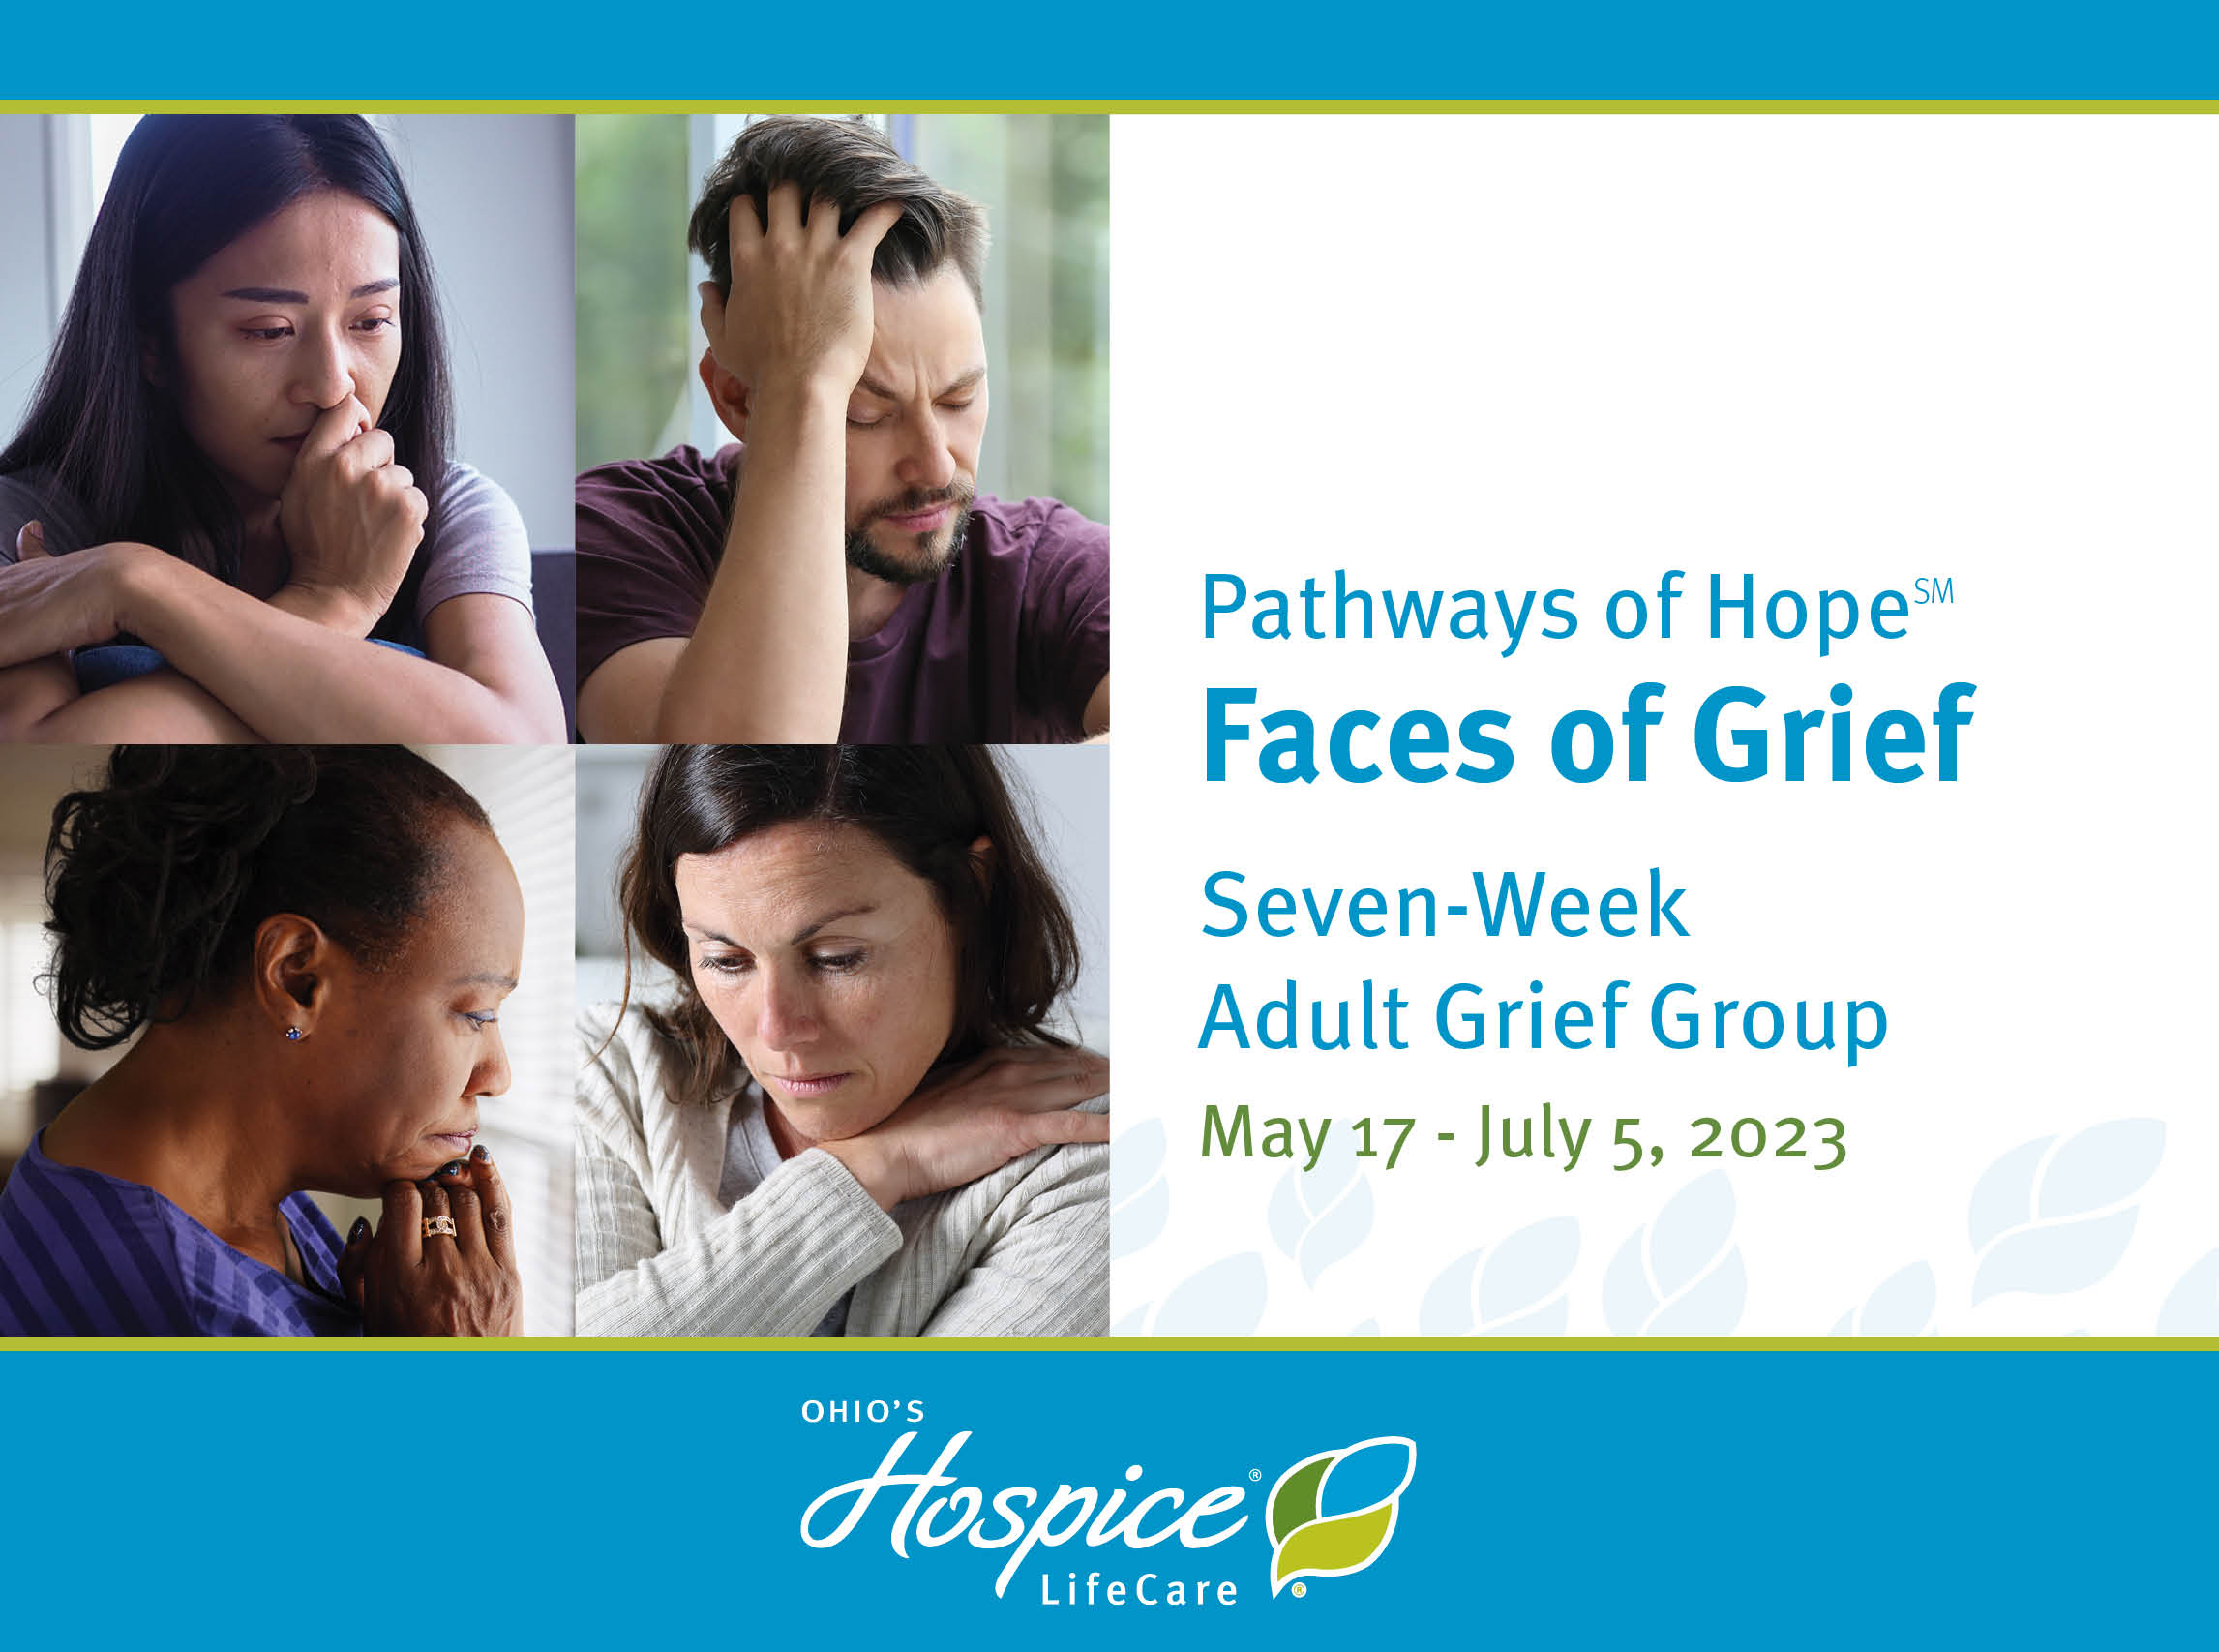 Pathways of Hope Faces of Grief Seven-Week Adult Grief Group May 17 - July 5, 2023 Ohio's Hospice LifeCare